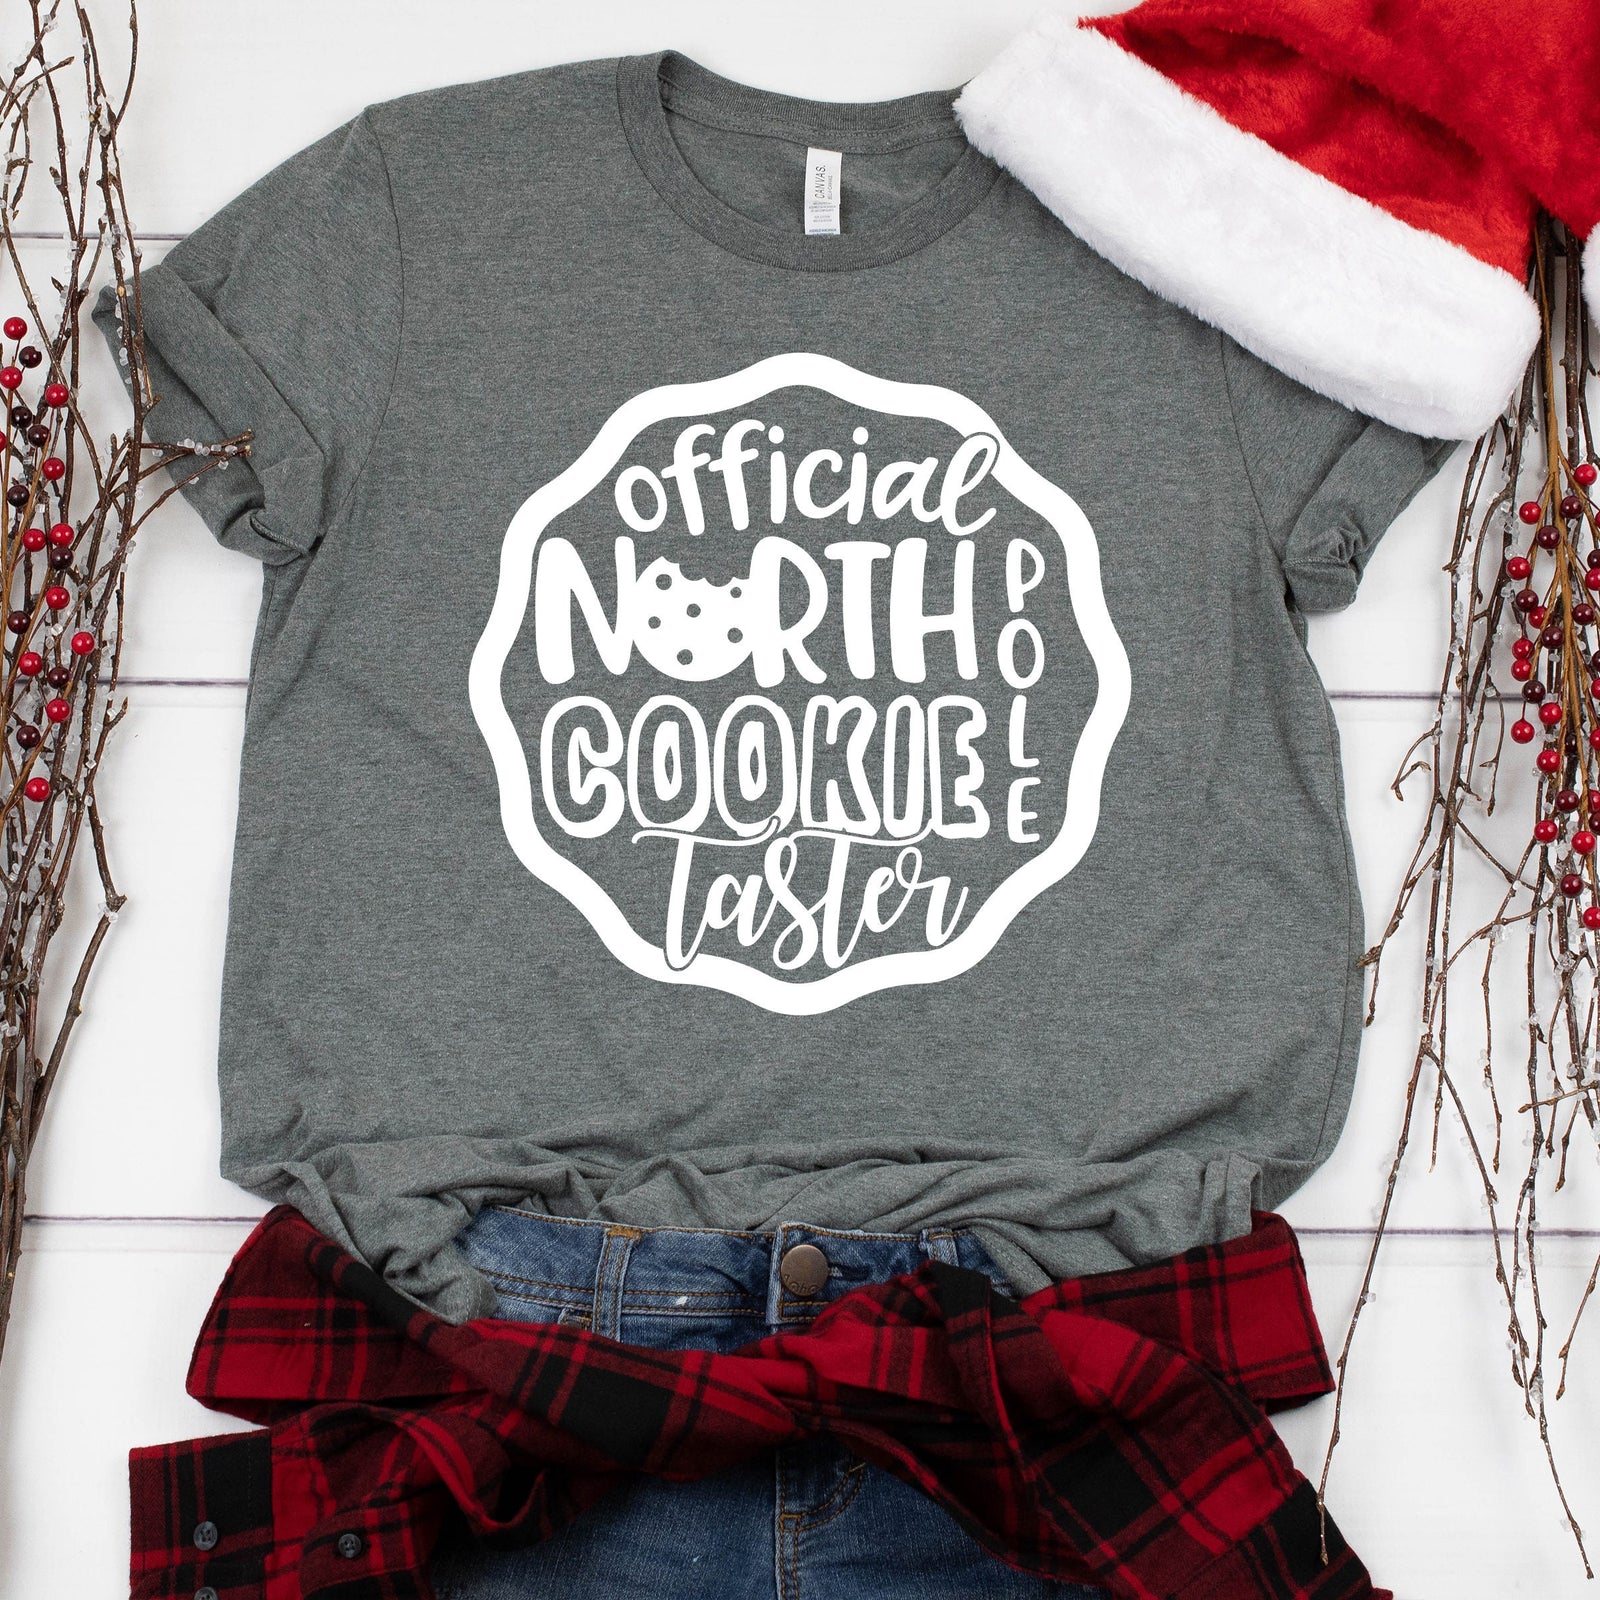 Official North Pole Cookie Taster Christmas T Shirt - Funny Christmas Unisex Shirt - Holiday Couple Matching Shirt - Cute Christmas Shirt